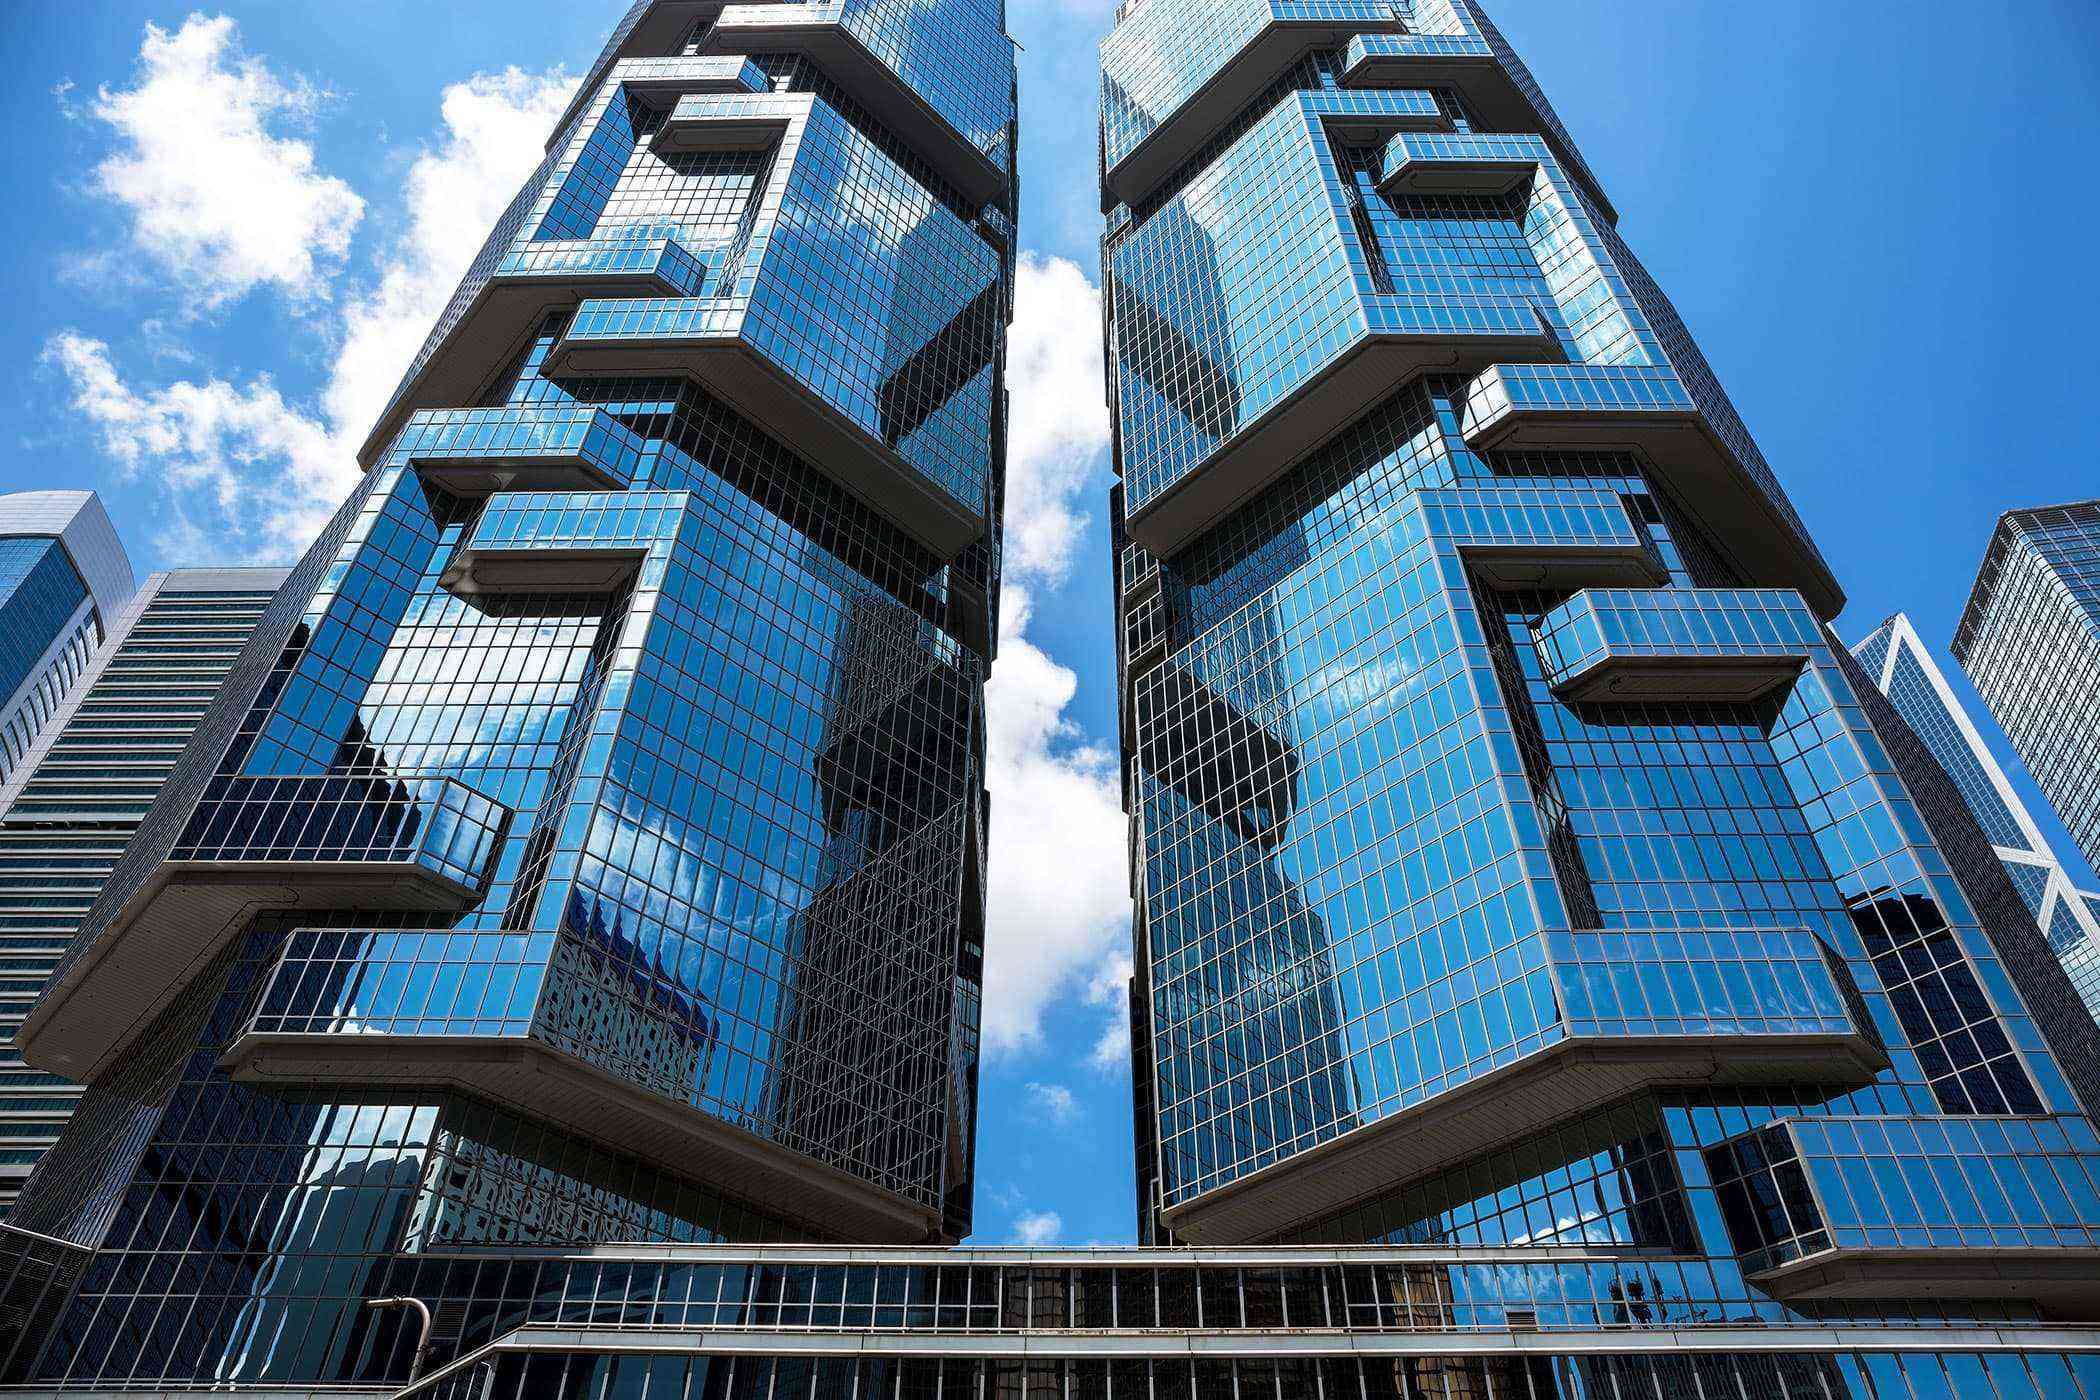 14 Skyscrapers That Look Like They’re From the Future – Fodors Travel Guide